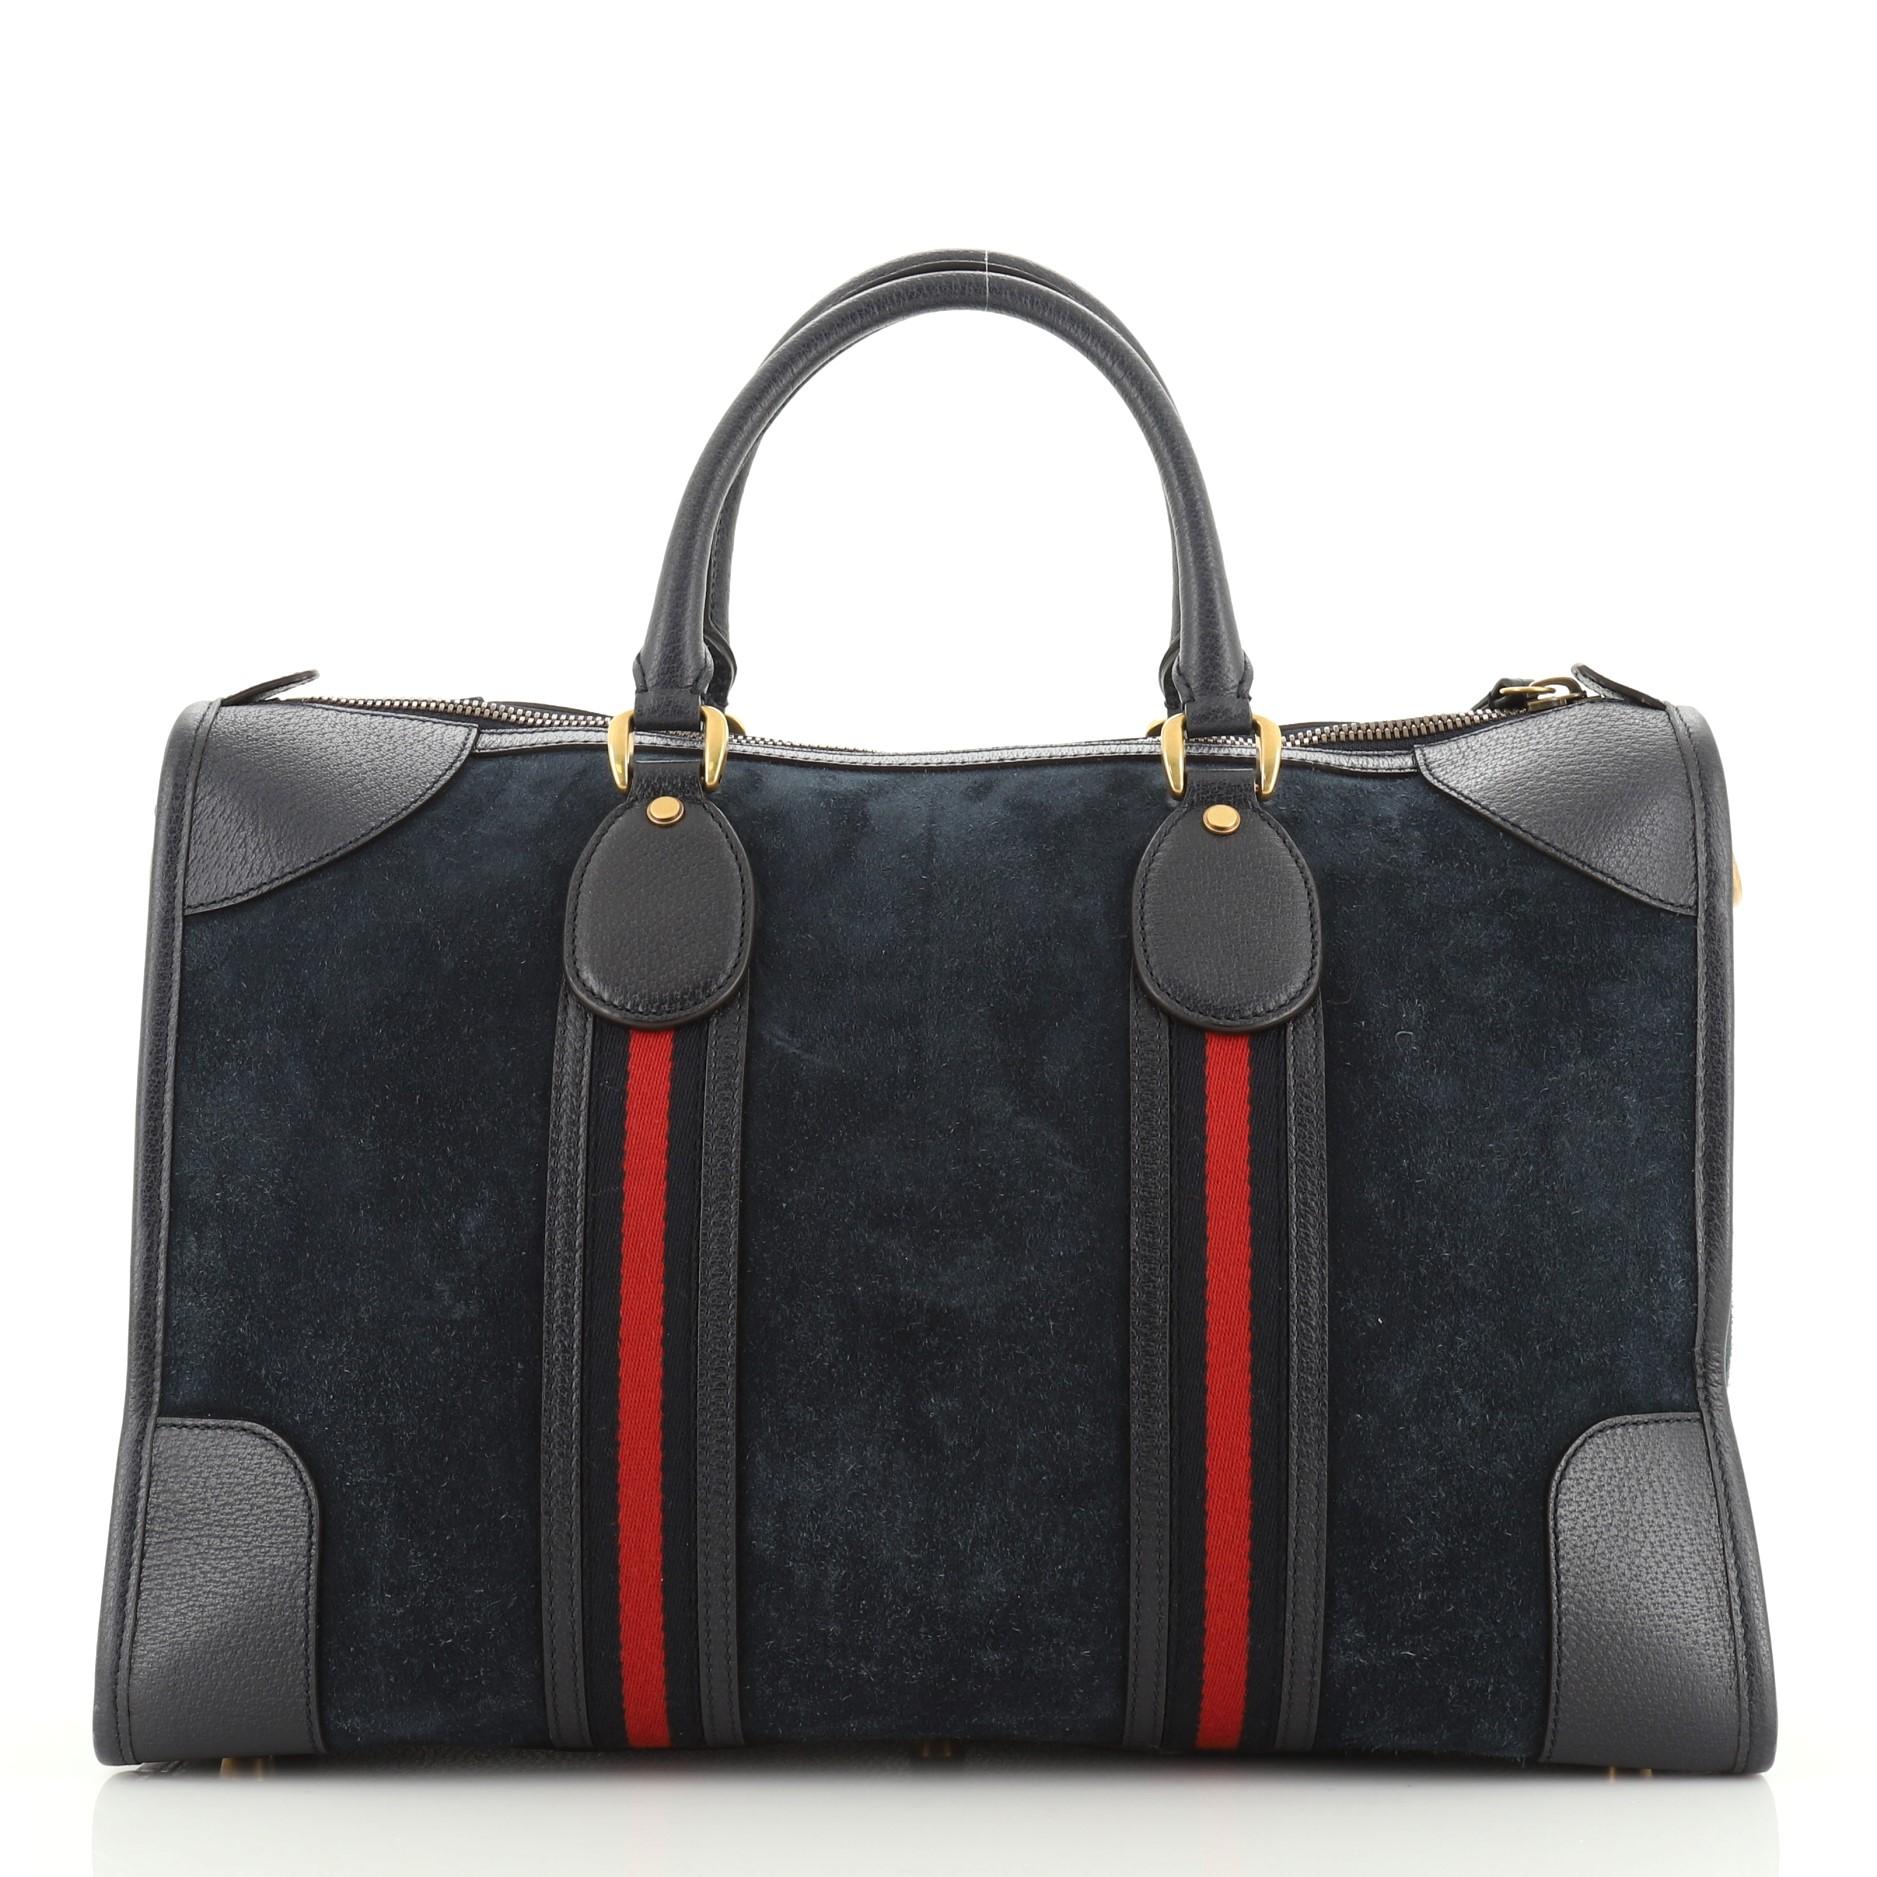 gucci duffle bag outlet